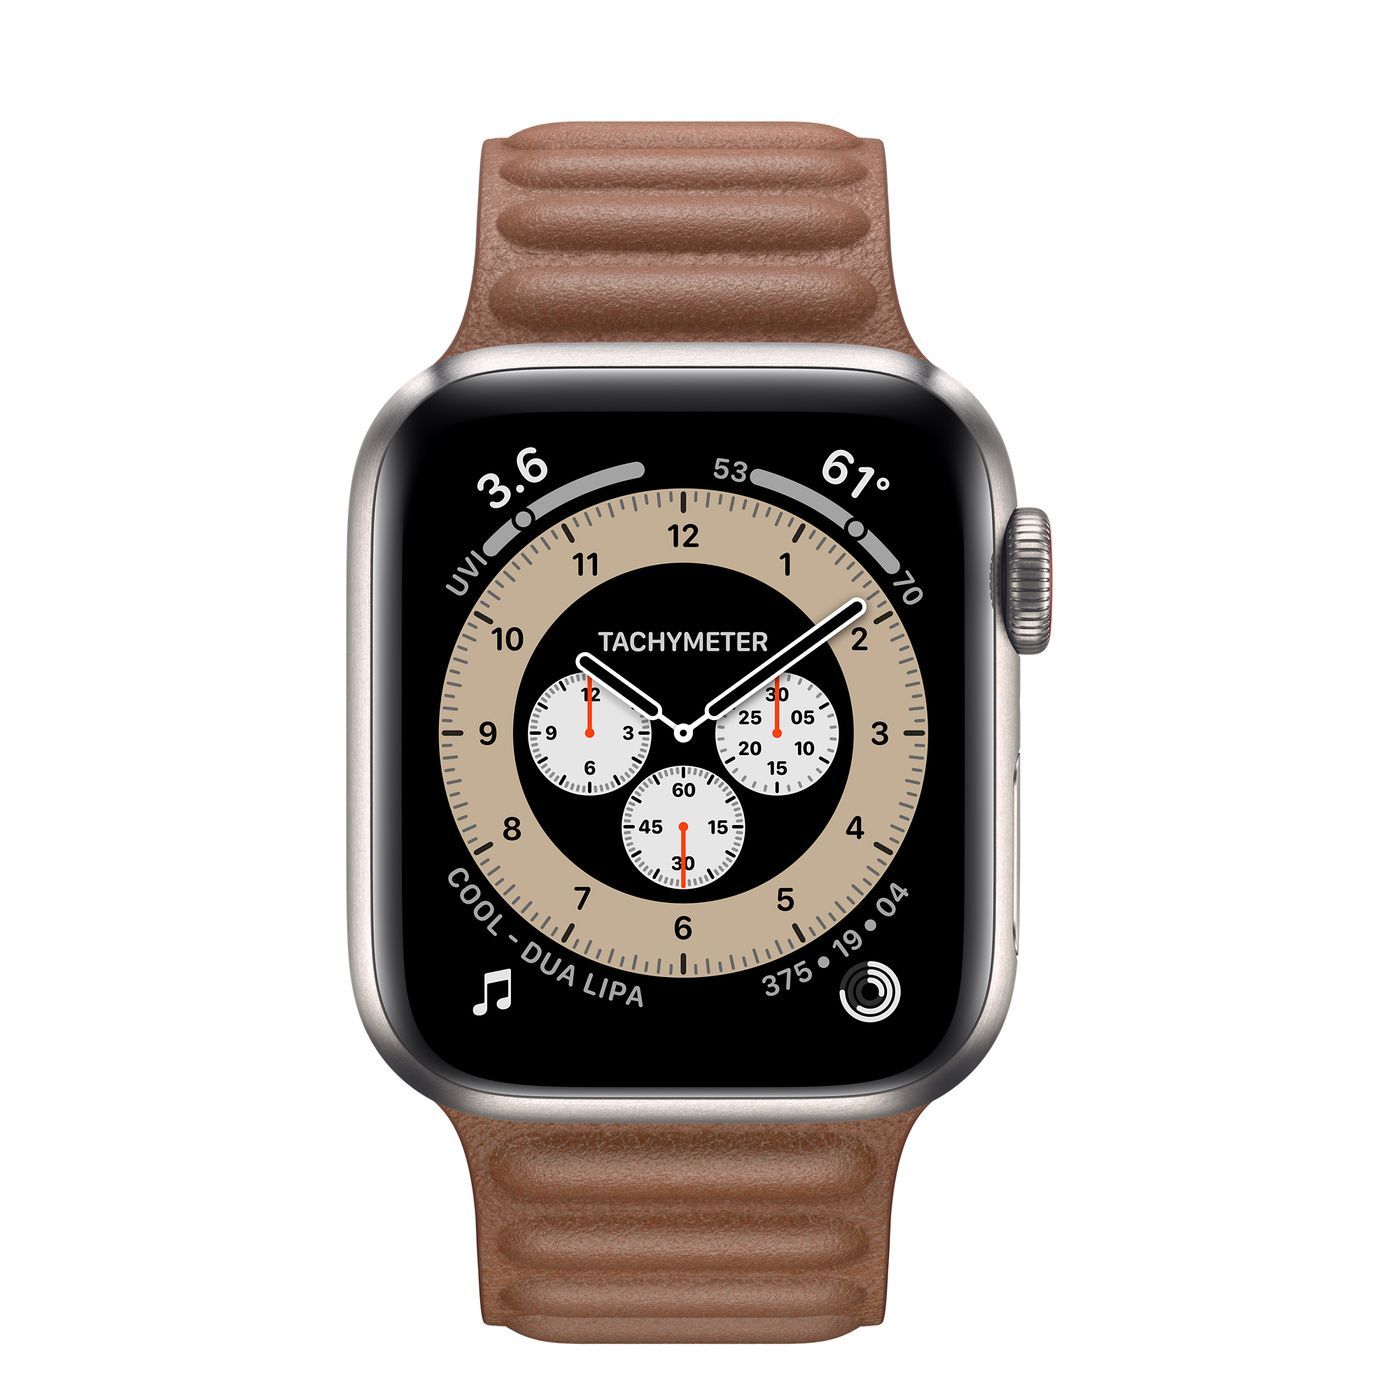 Louis Vuitton takes on Apple Watch with this $2,450 Android Wear smartwatch